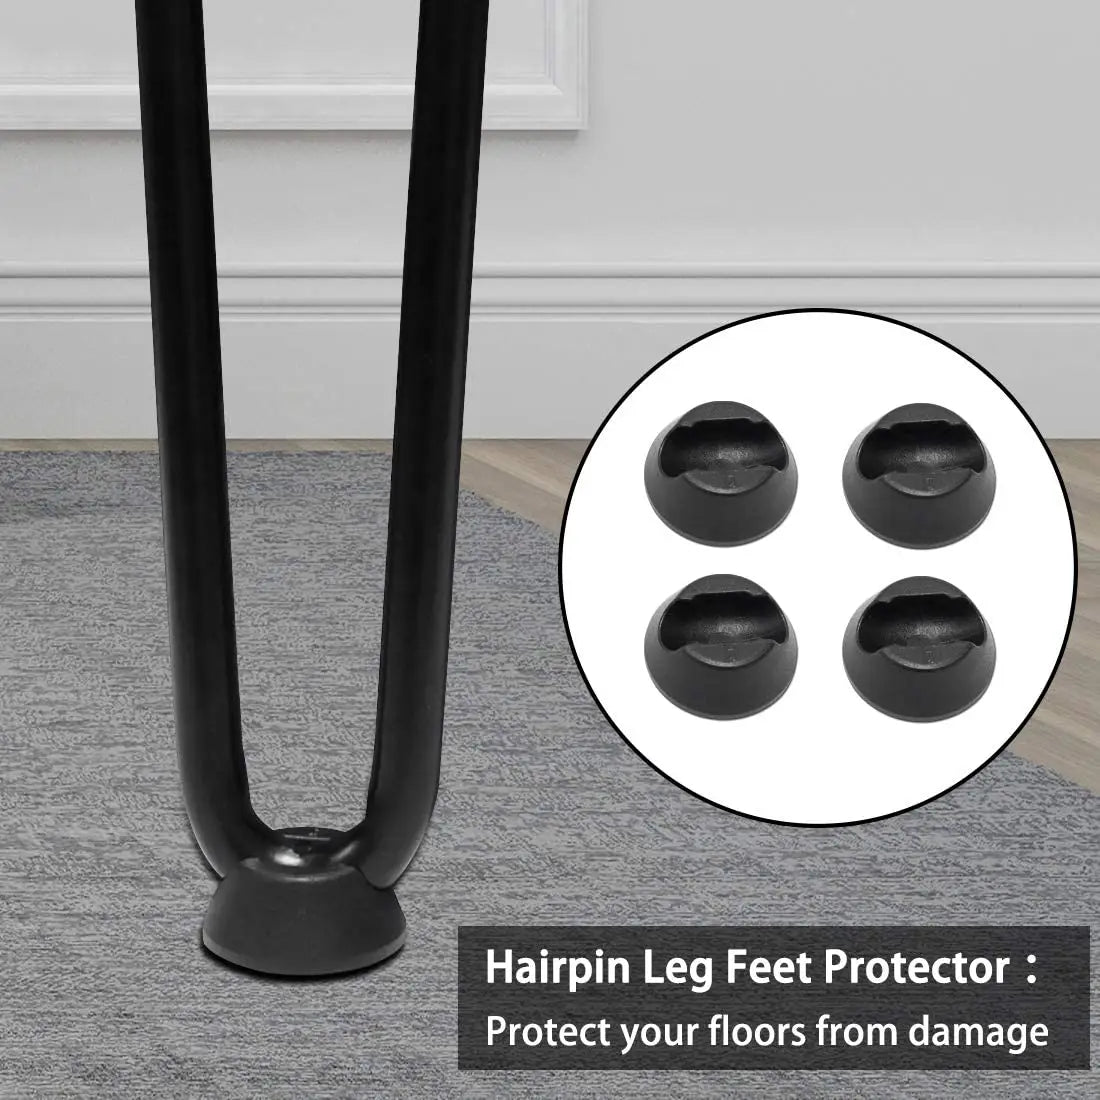 28" hairpin table and desk legs with leg protector